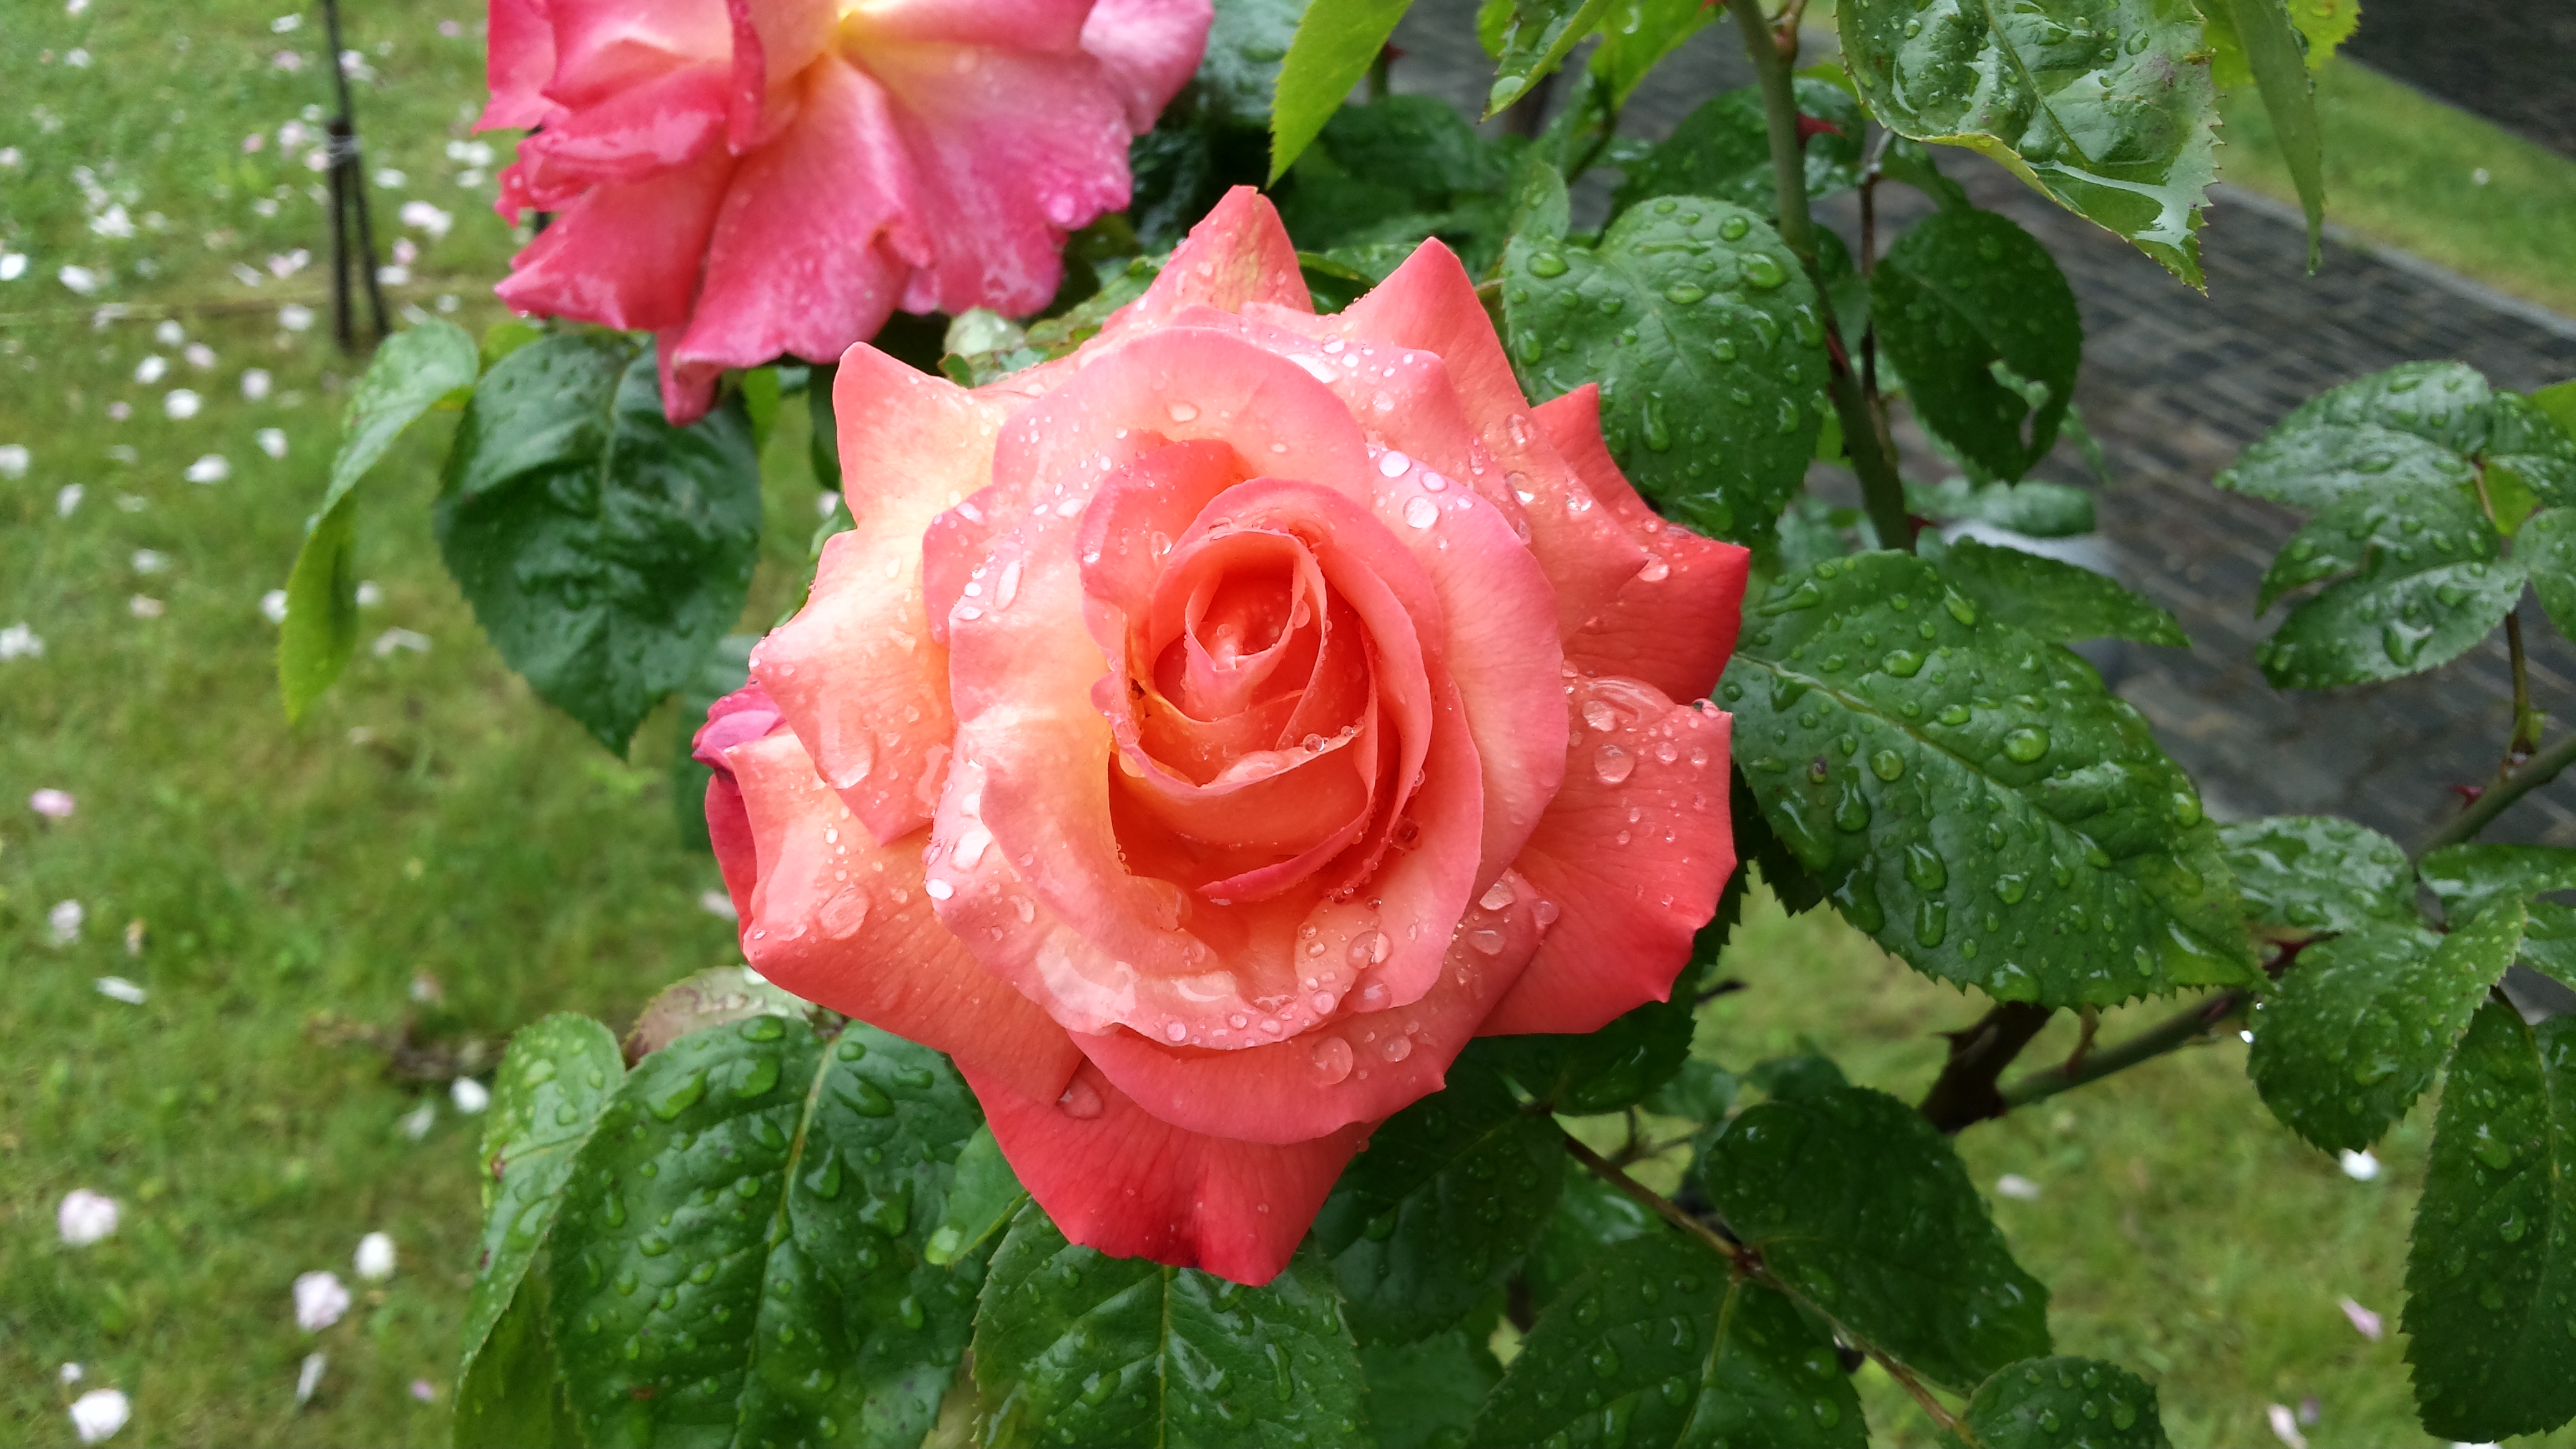 Roses after rain